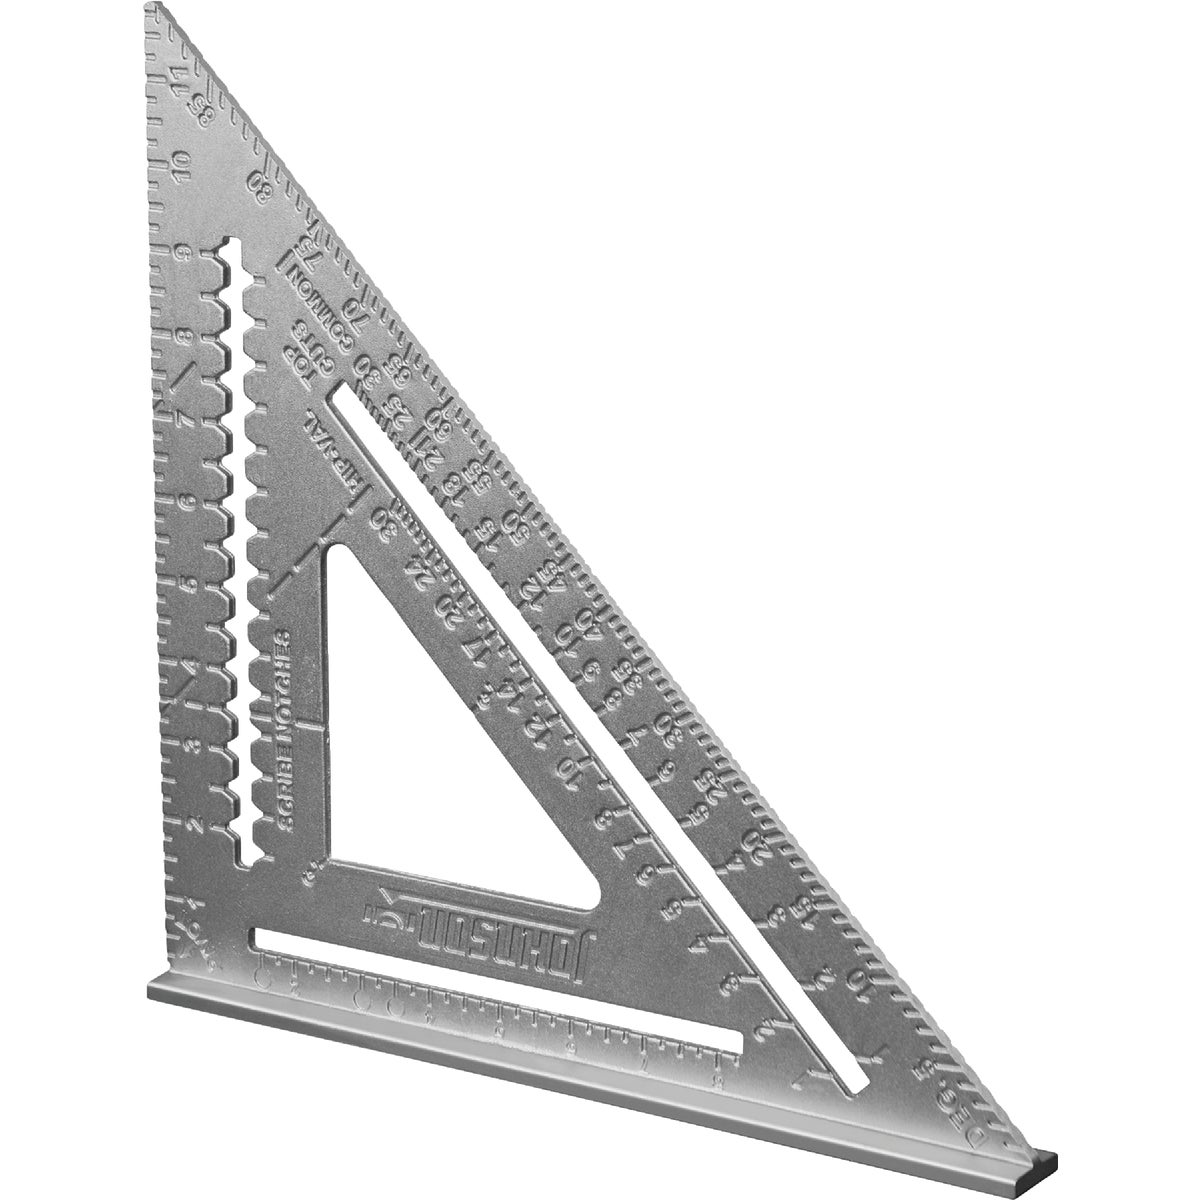 Johnson Level 12 In. Aluminum Rafter Square with Instruction Manual & Rafter Tables